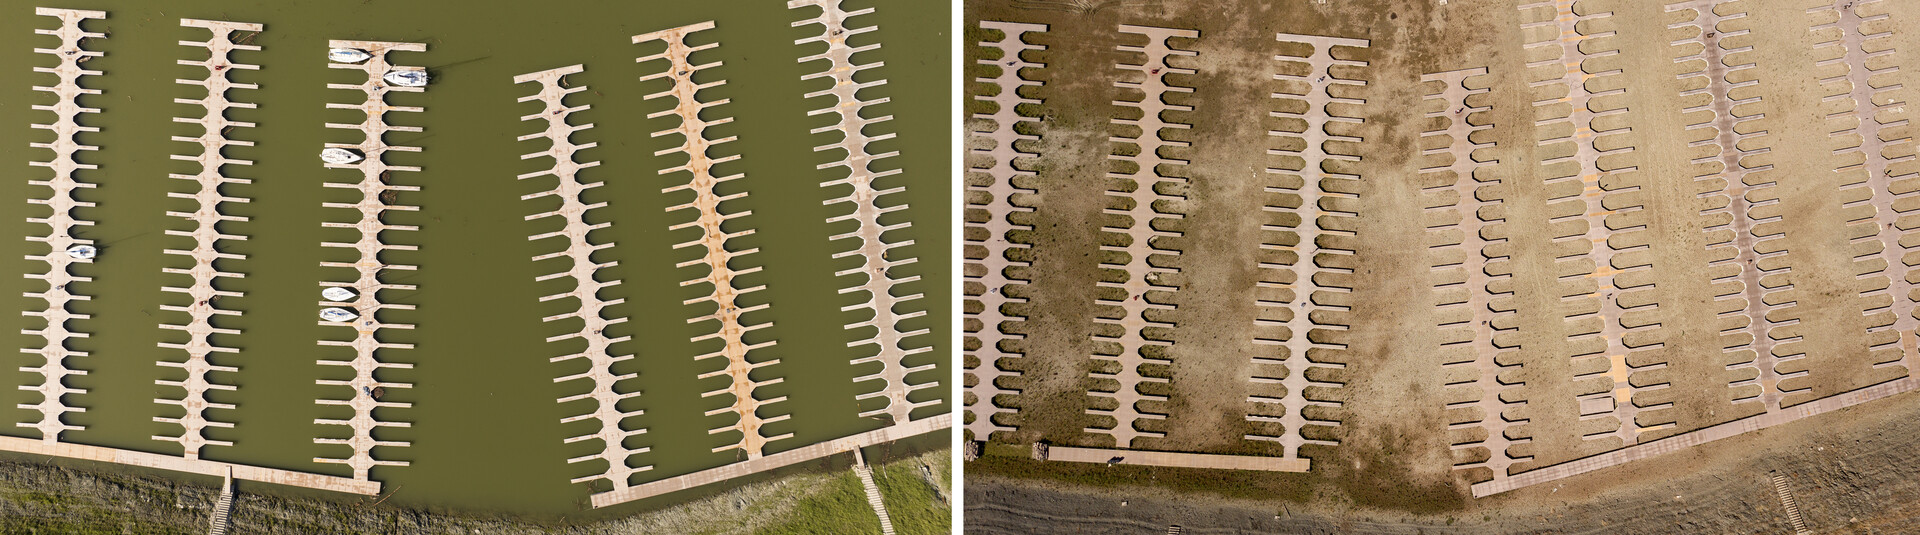 The photo on the left is the docks float in Folsom Lake filled with water. The photo on the right shows now water at all above the docks.